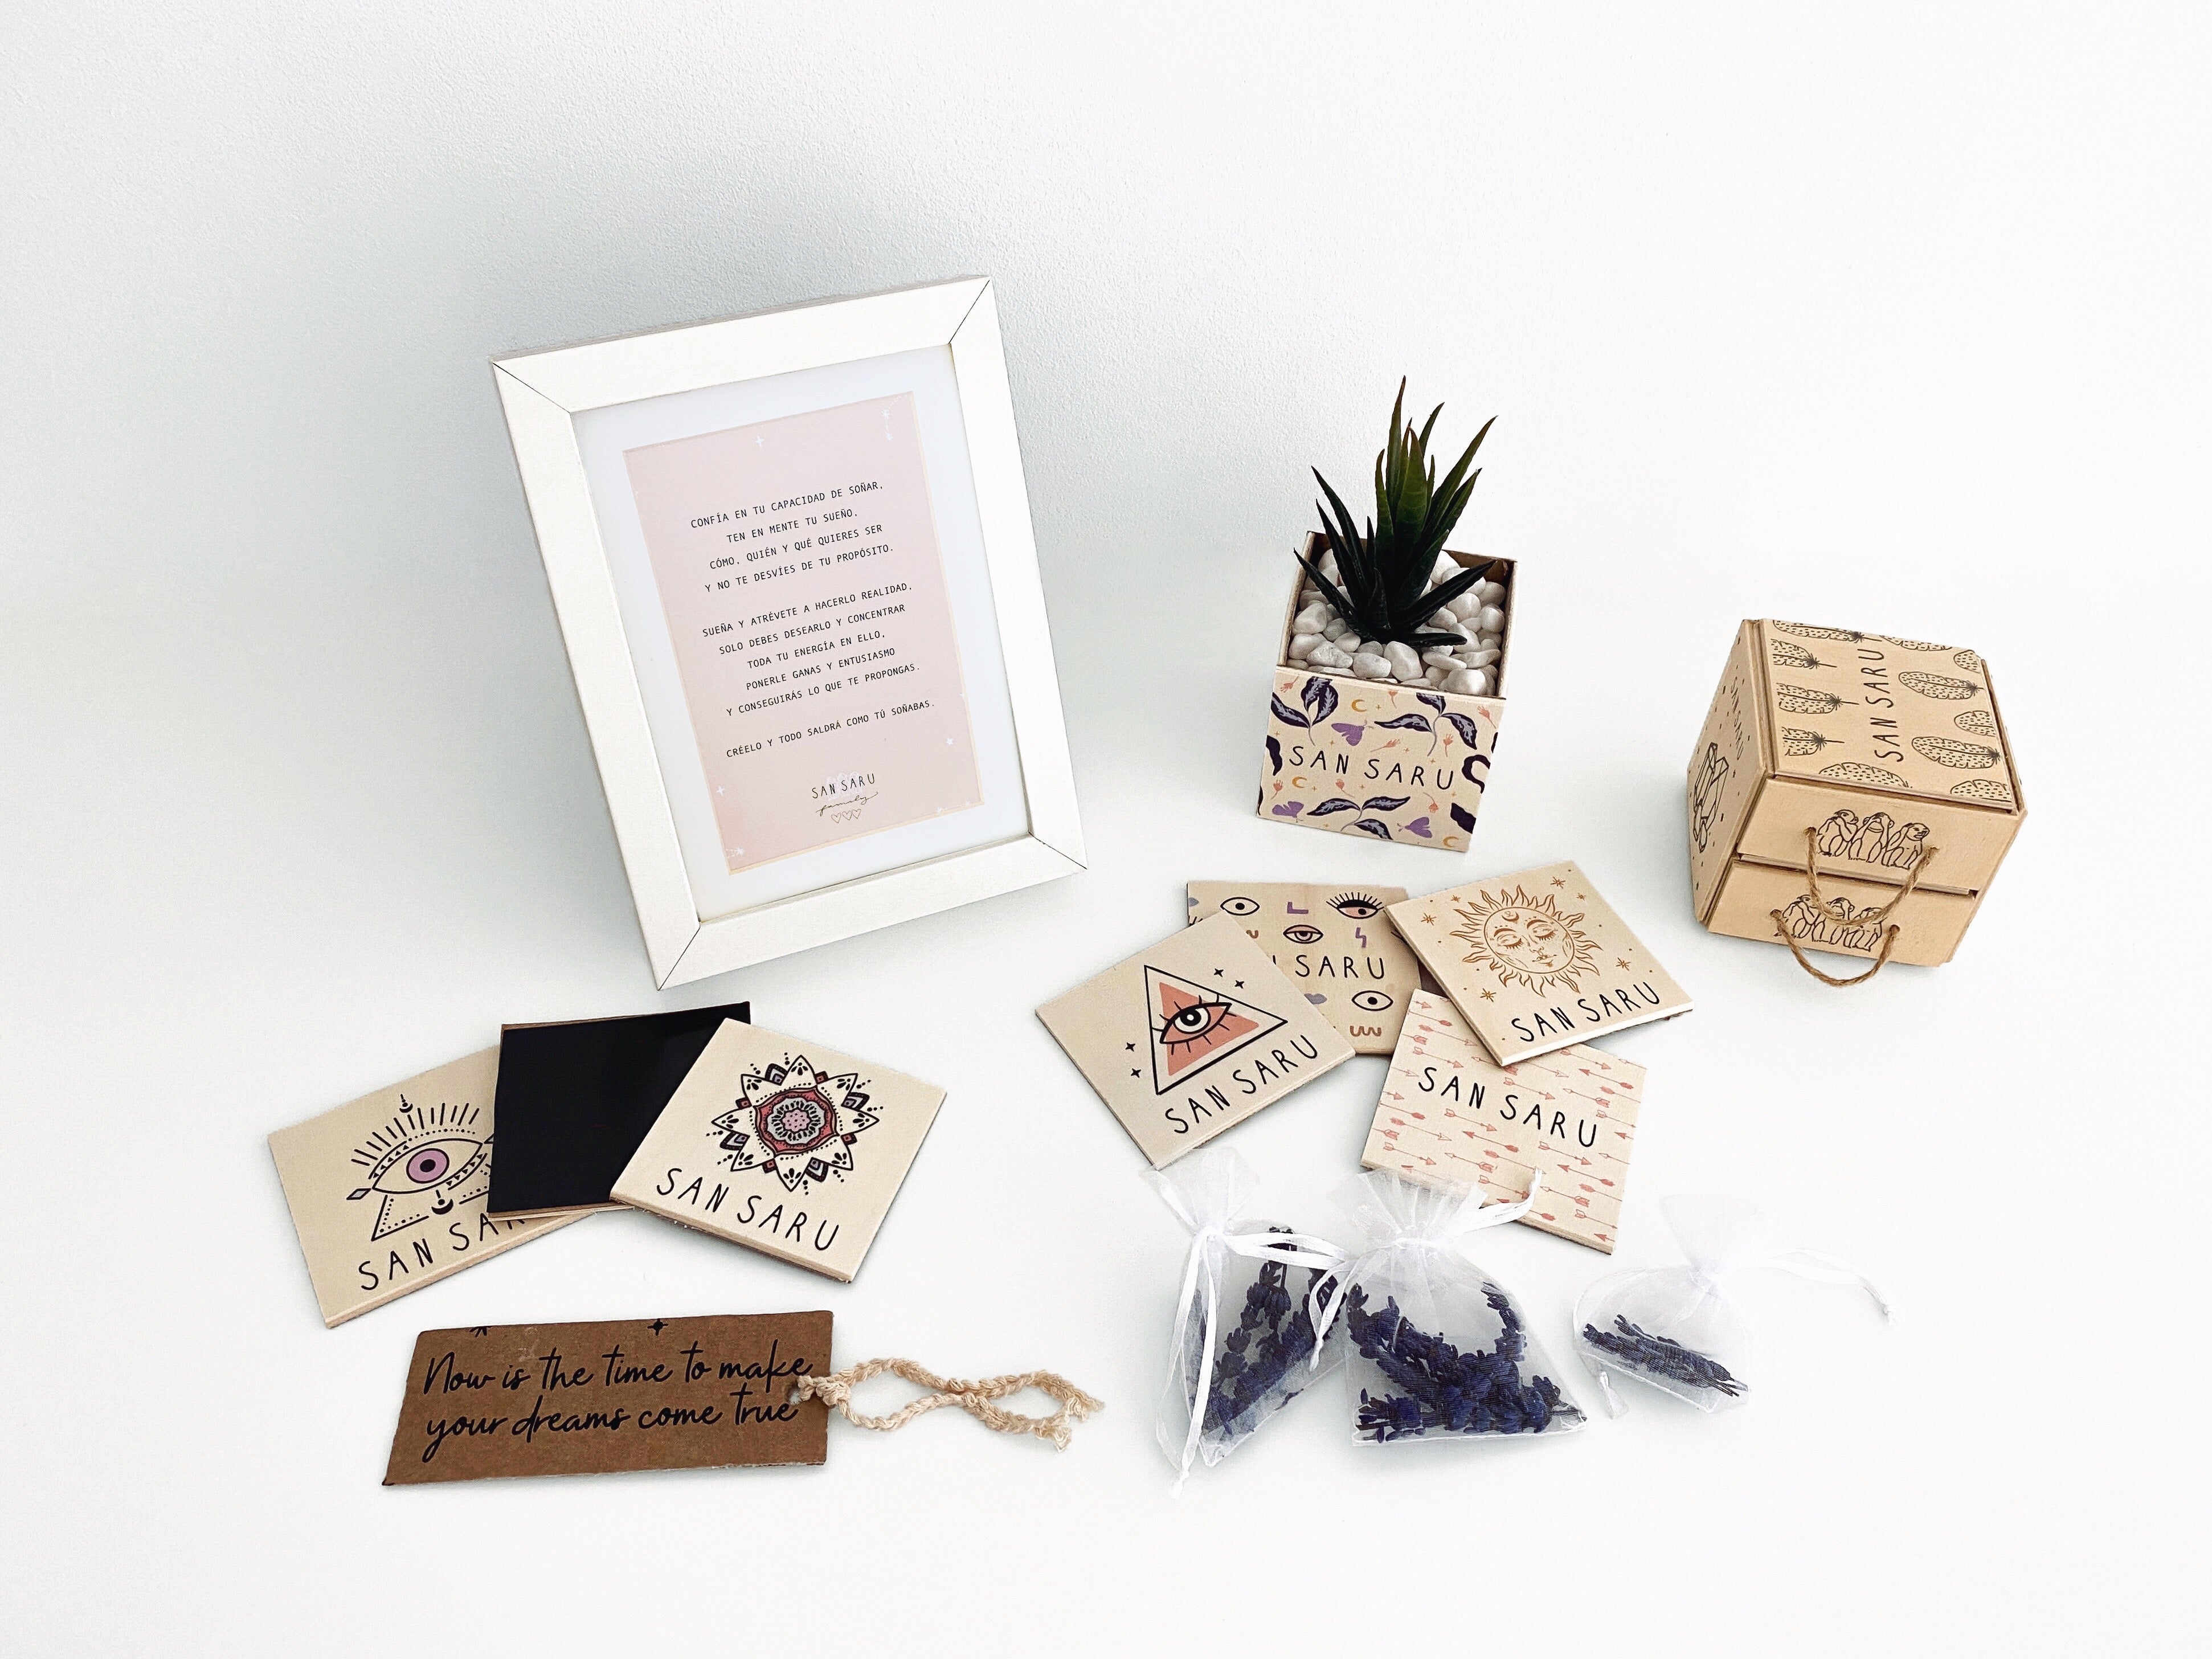 DIY with our Packaging – San Saru